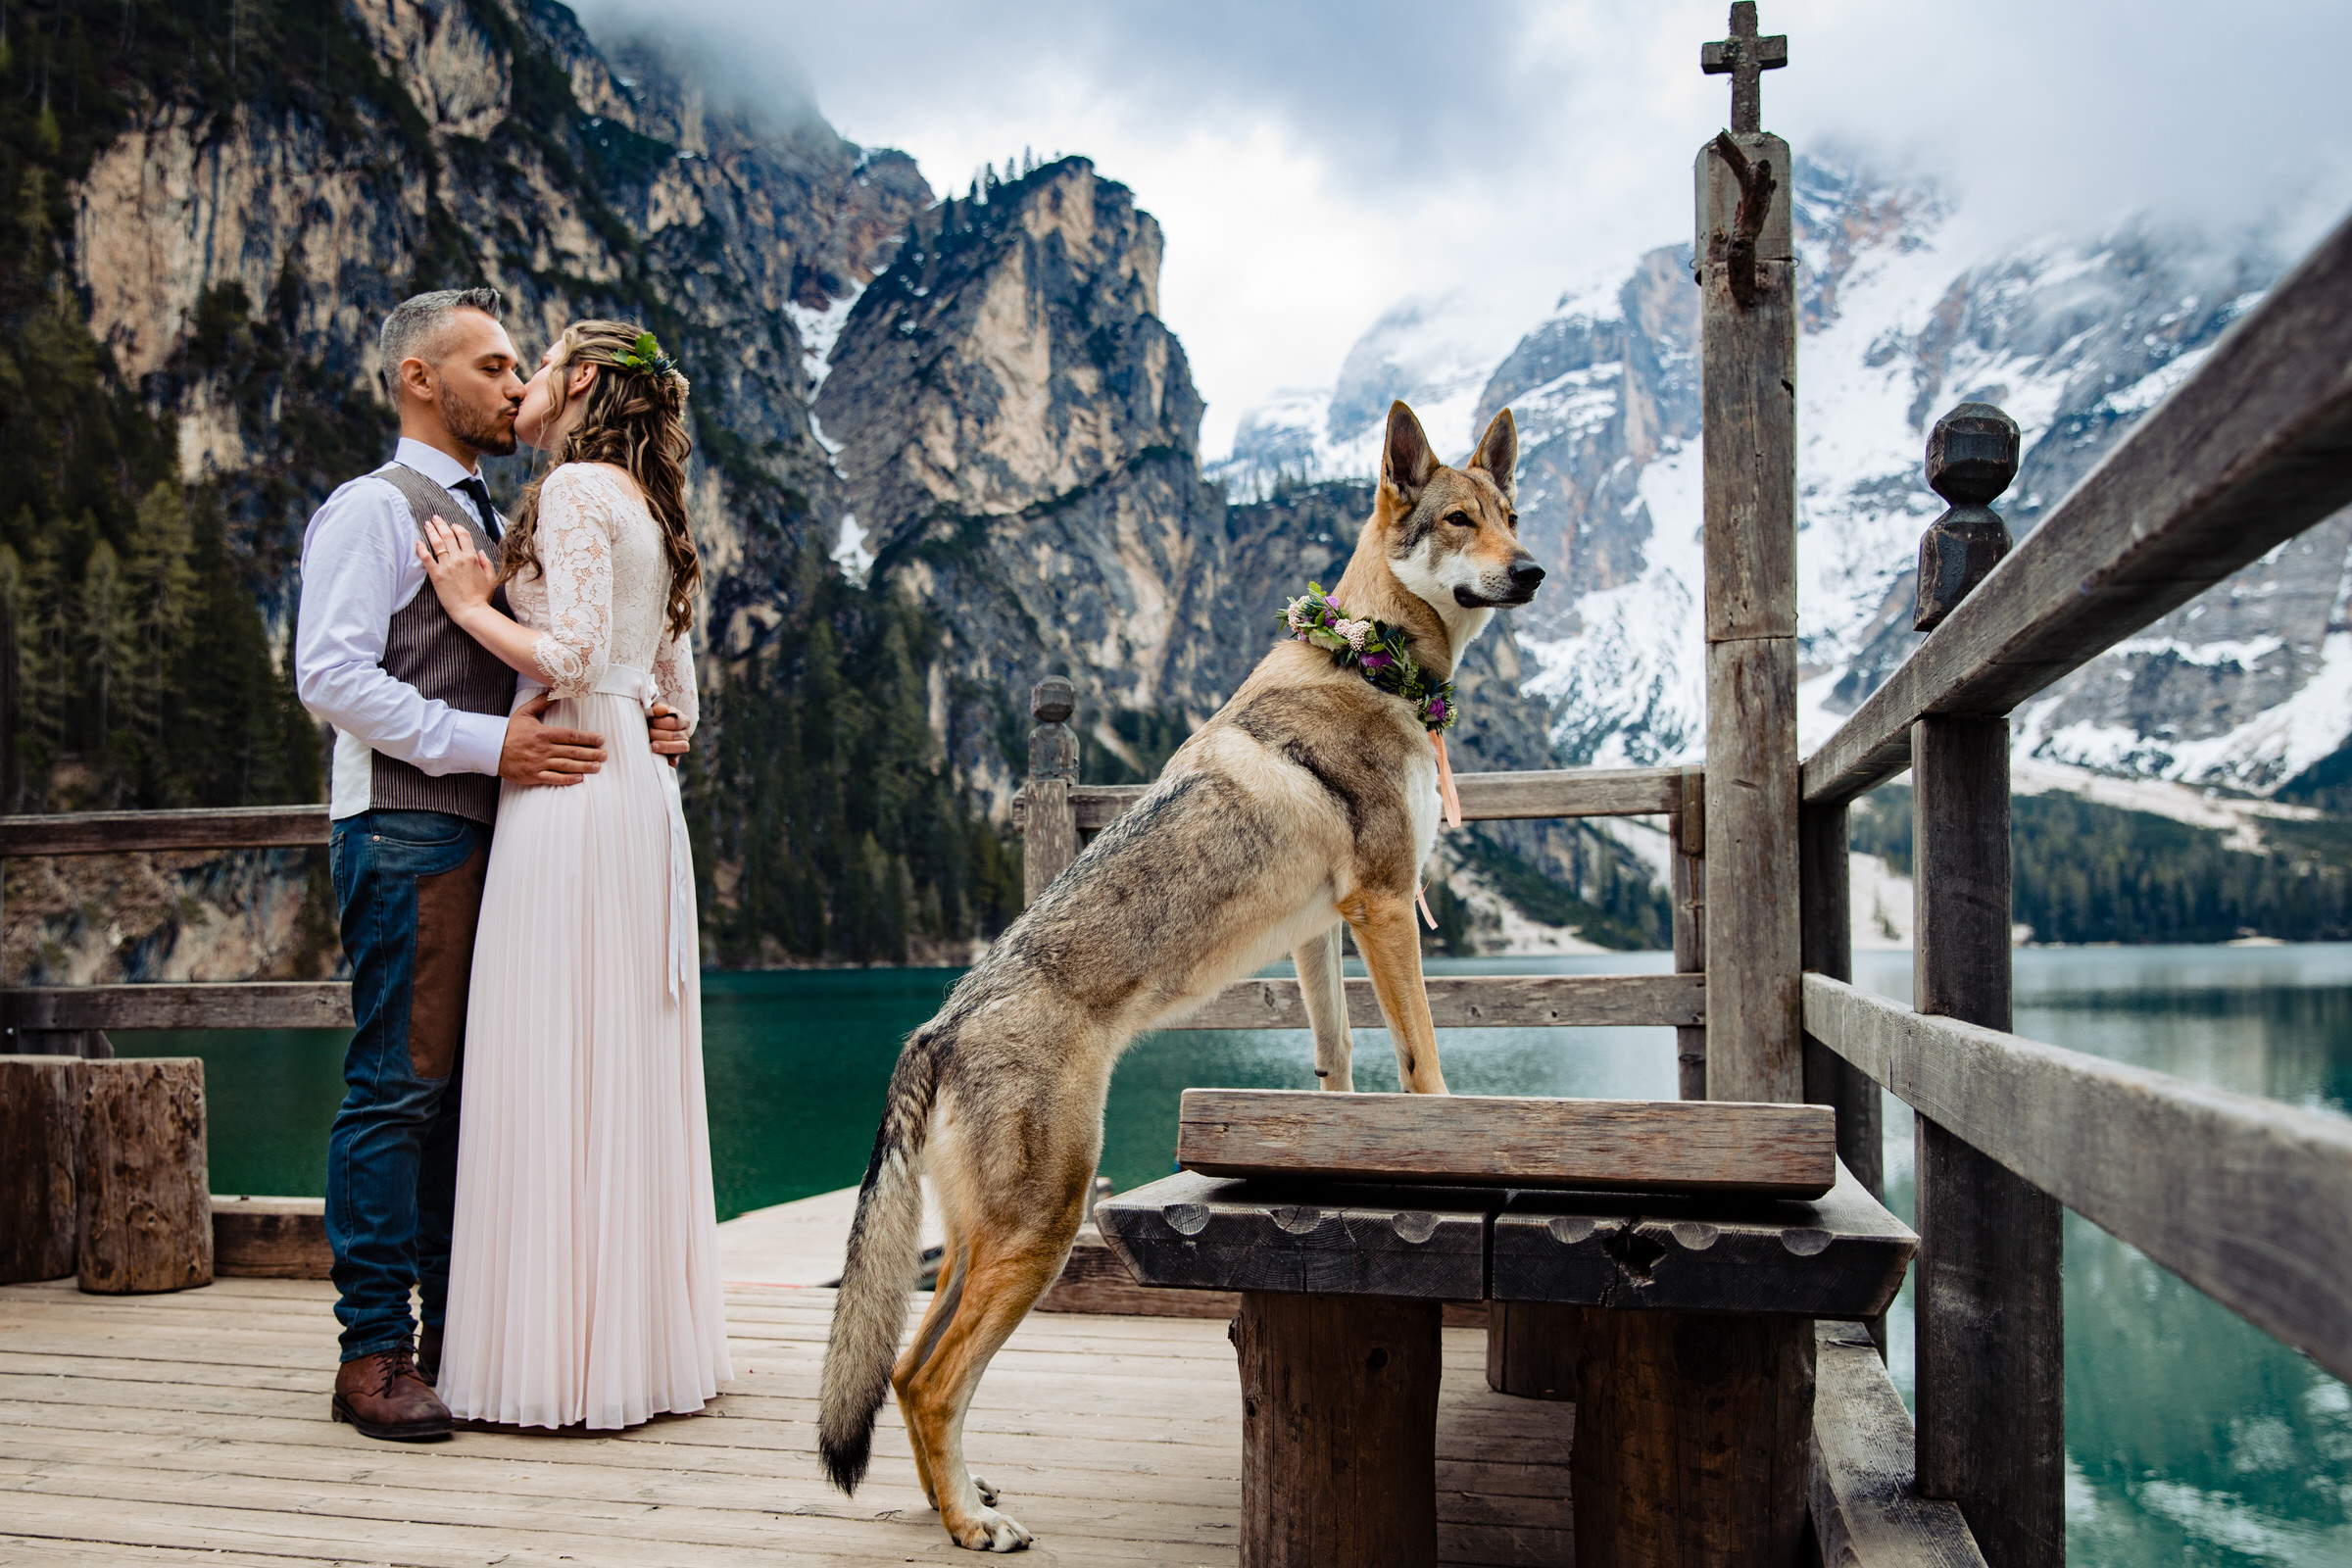 At Lake Braies with a somewhat special witness...